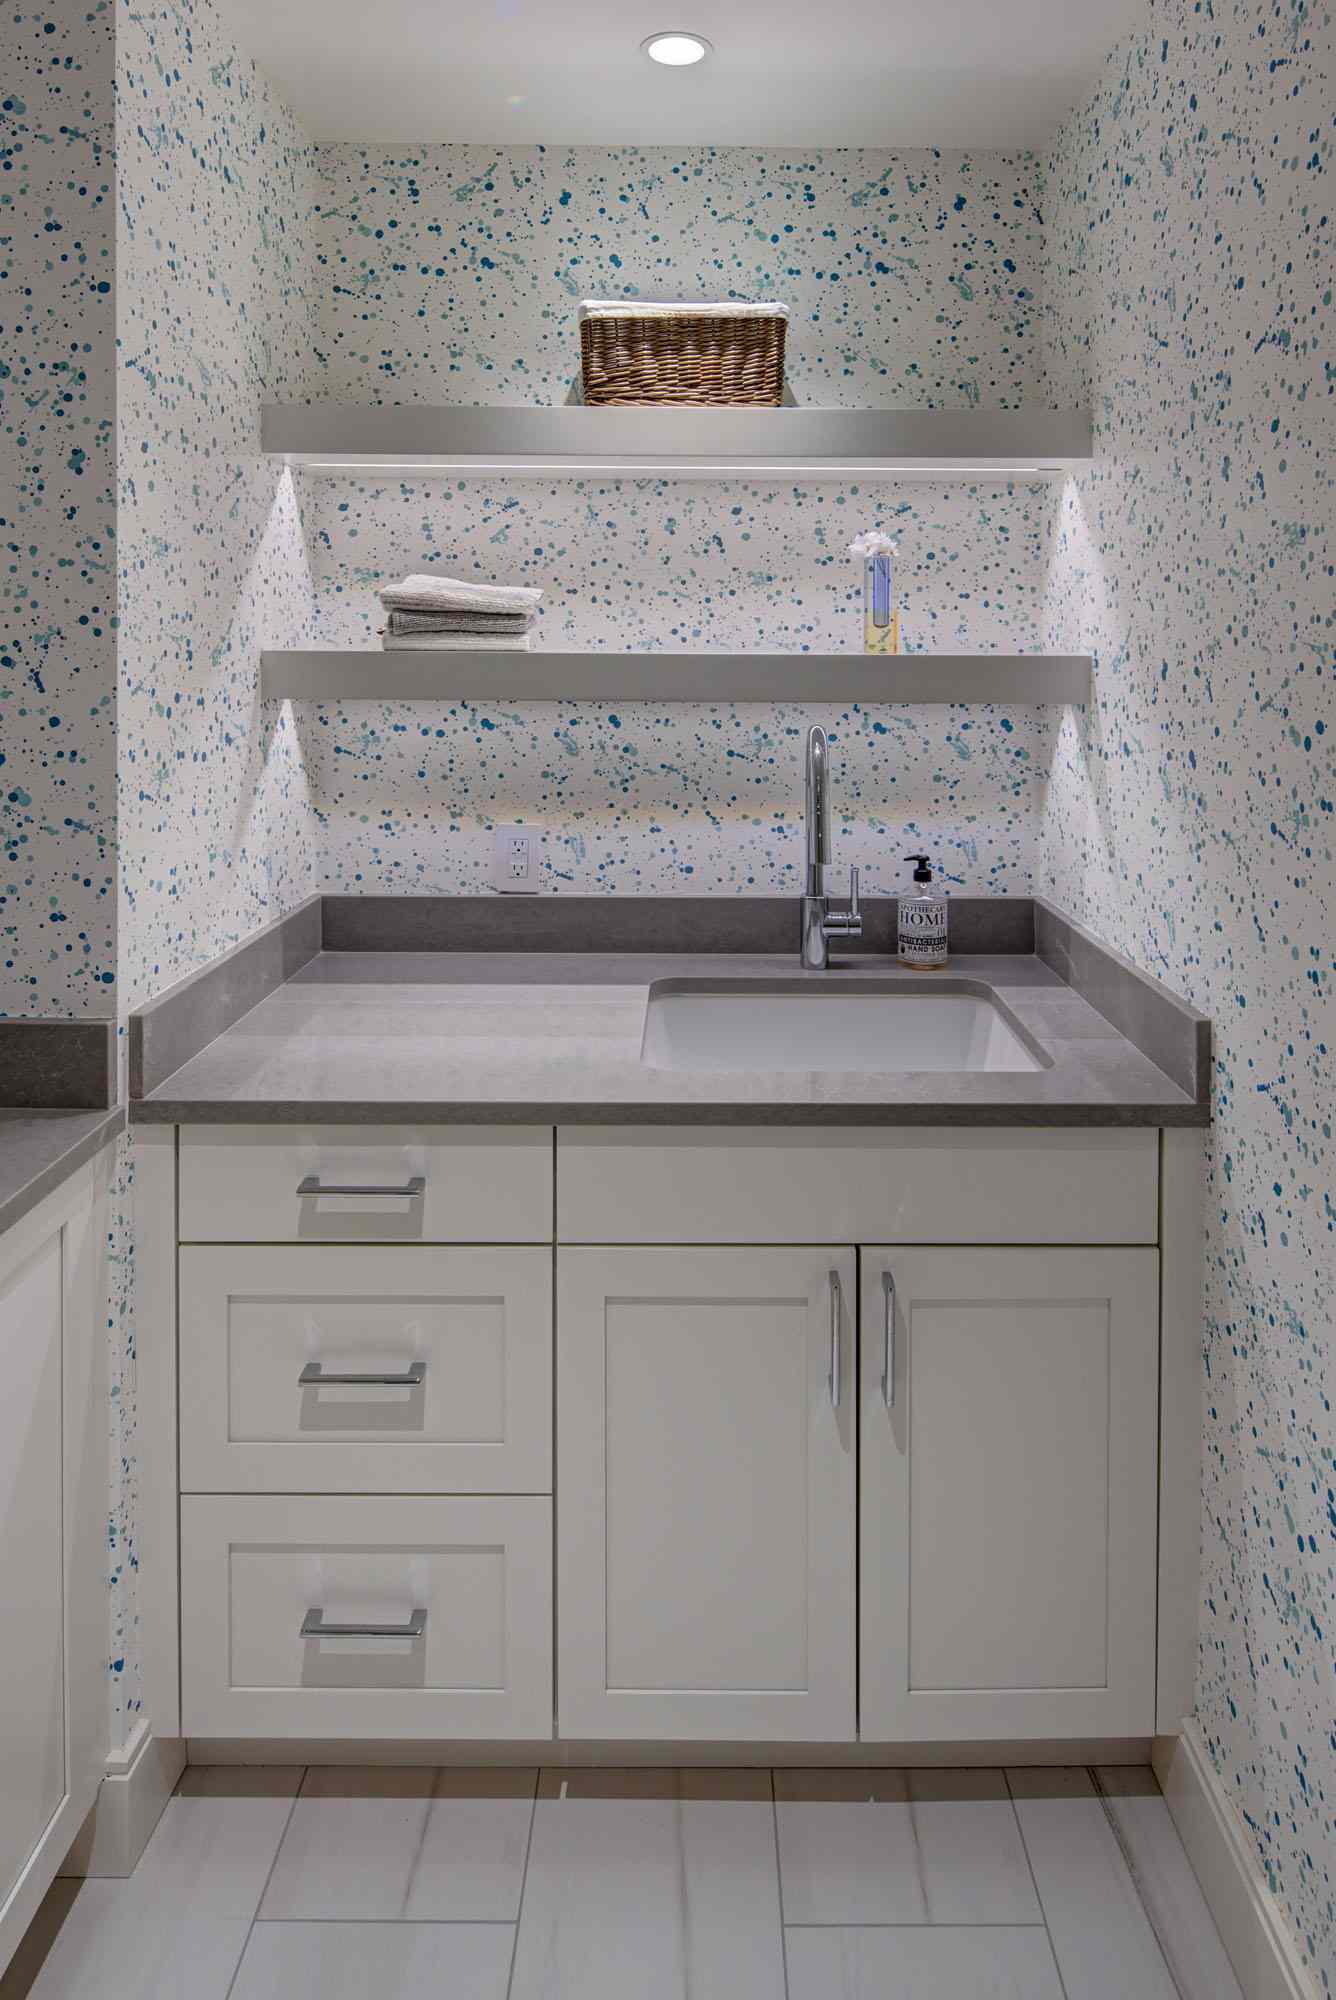 Paint splatter style wallpaper in a laundry room with white cabinets and floating shelves